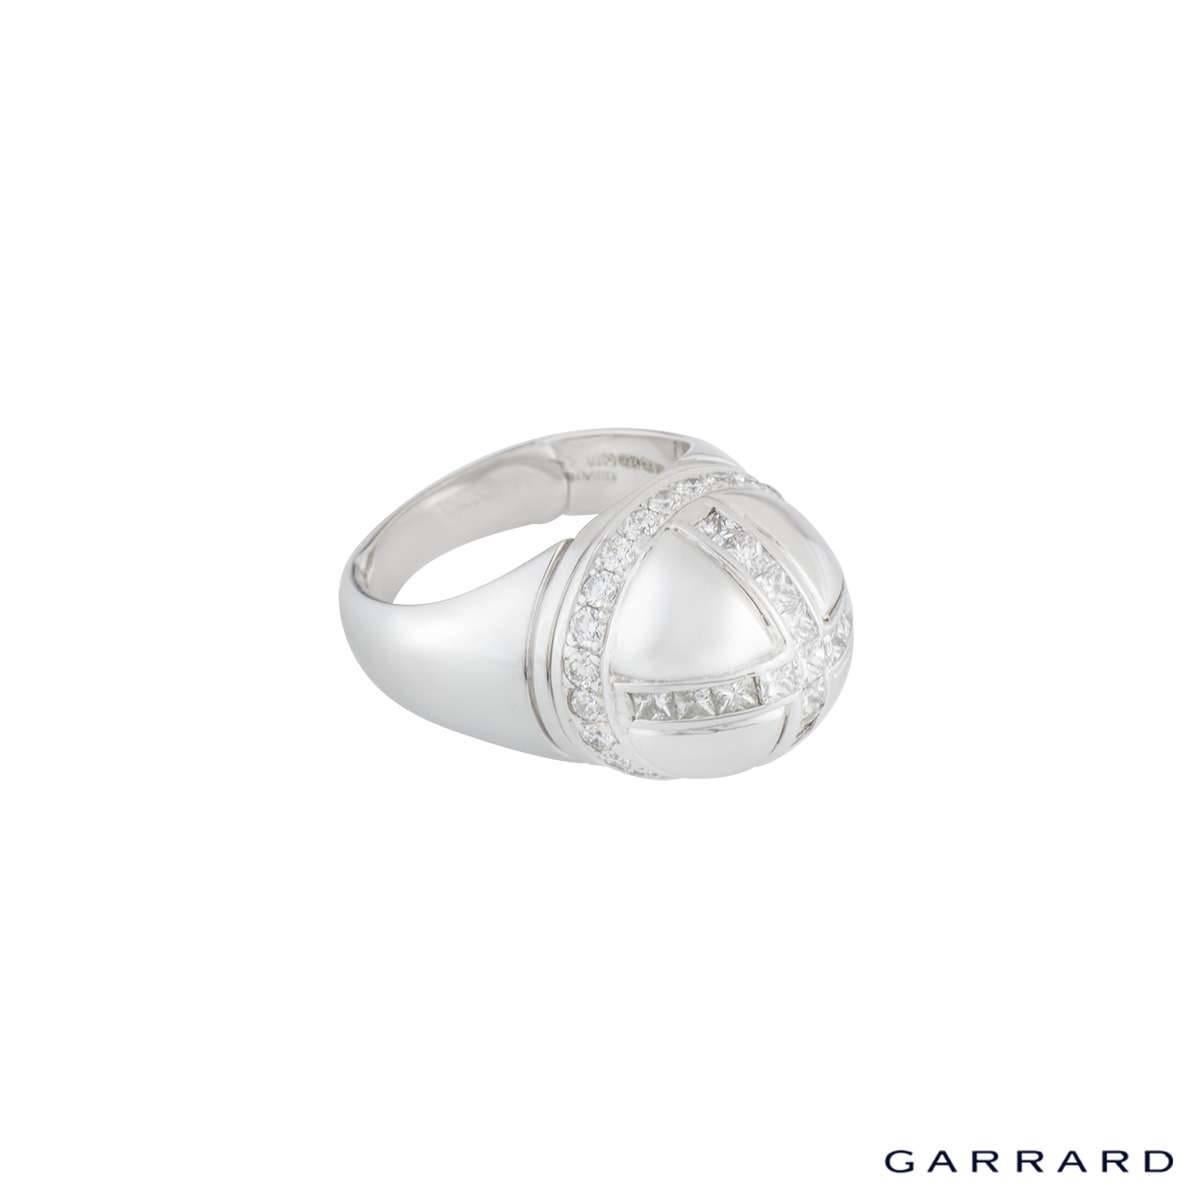 A unique 18k white gold diamond ring from Garrard. The dome shaped ring is set with princess cut diamonds on the top making a cross and around the sides are round brilliant cut diamonds making the ring a crown style totalling approximately 1.07ct.